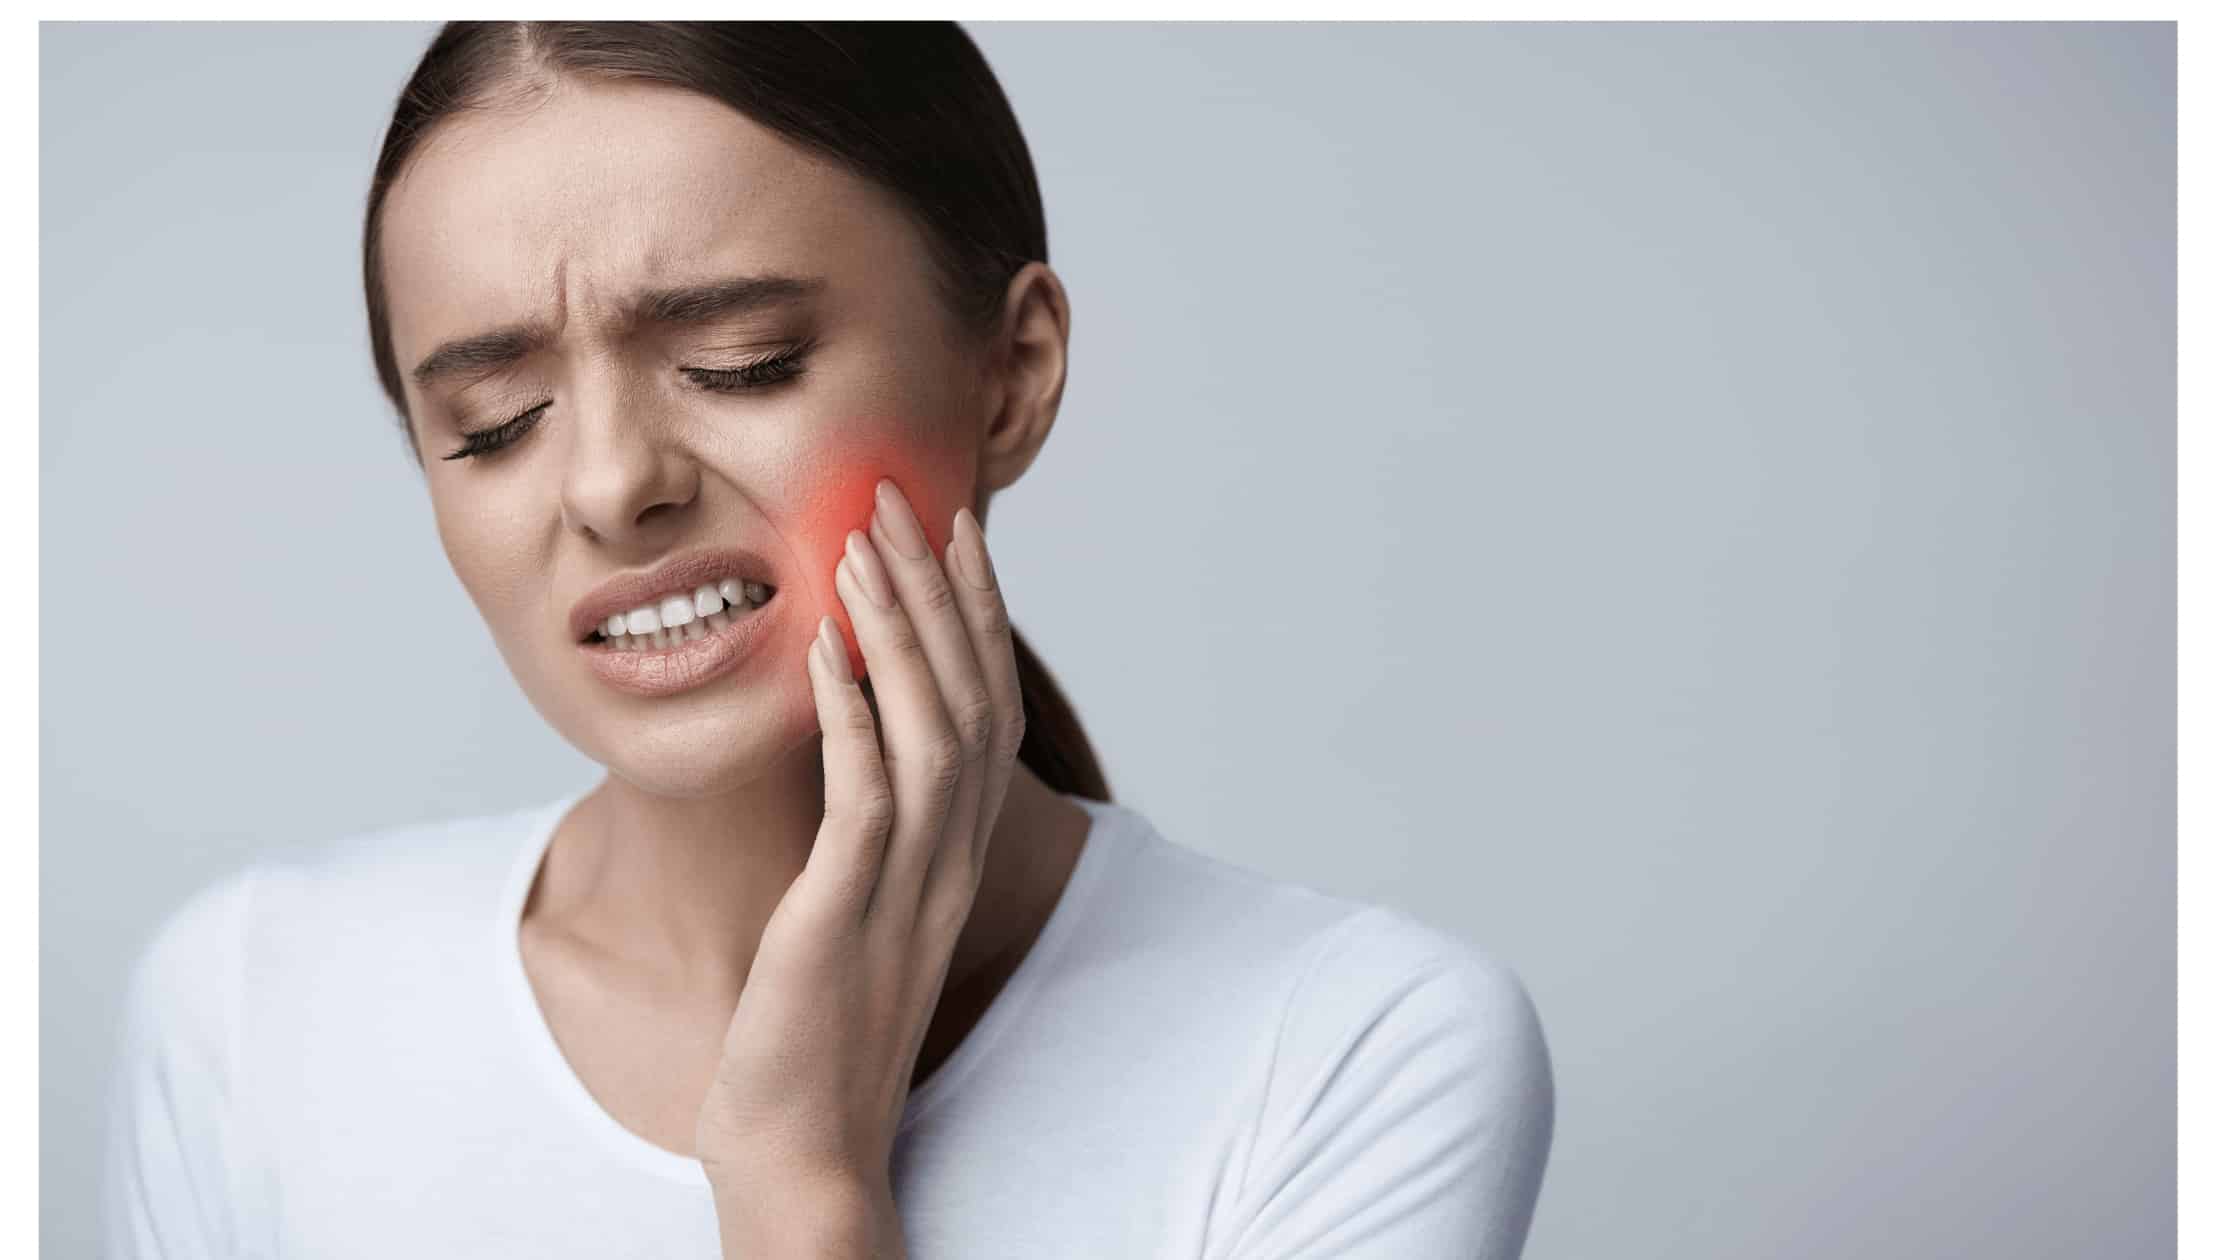 Is it True That a Tooth Infection Can Kill You?